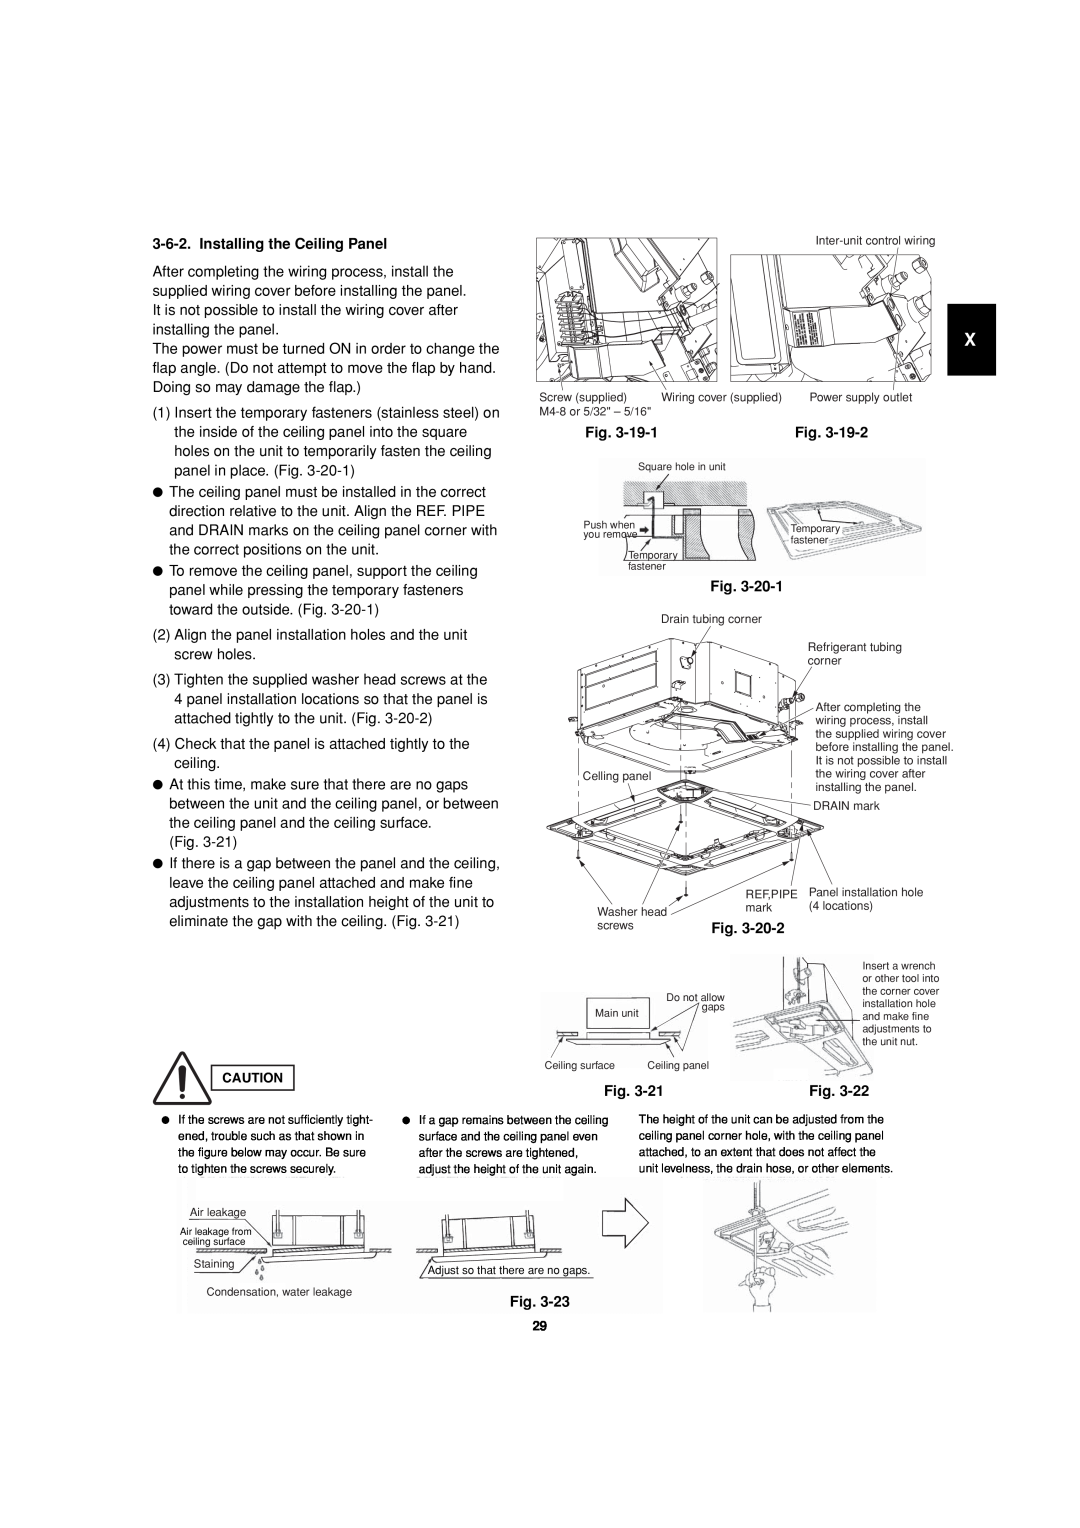 Sanyo 85464359981002 installation instructions Installing the Ceiling Panel, Fig 